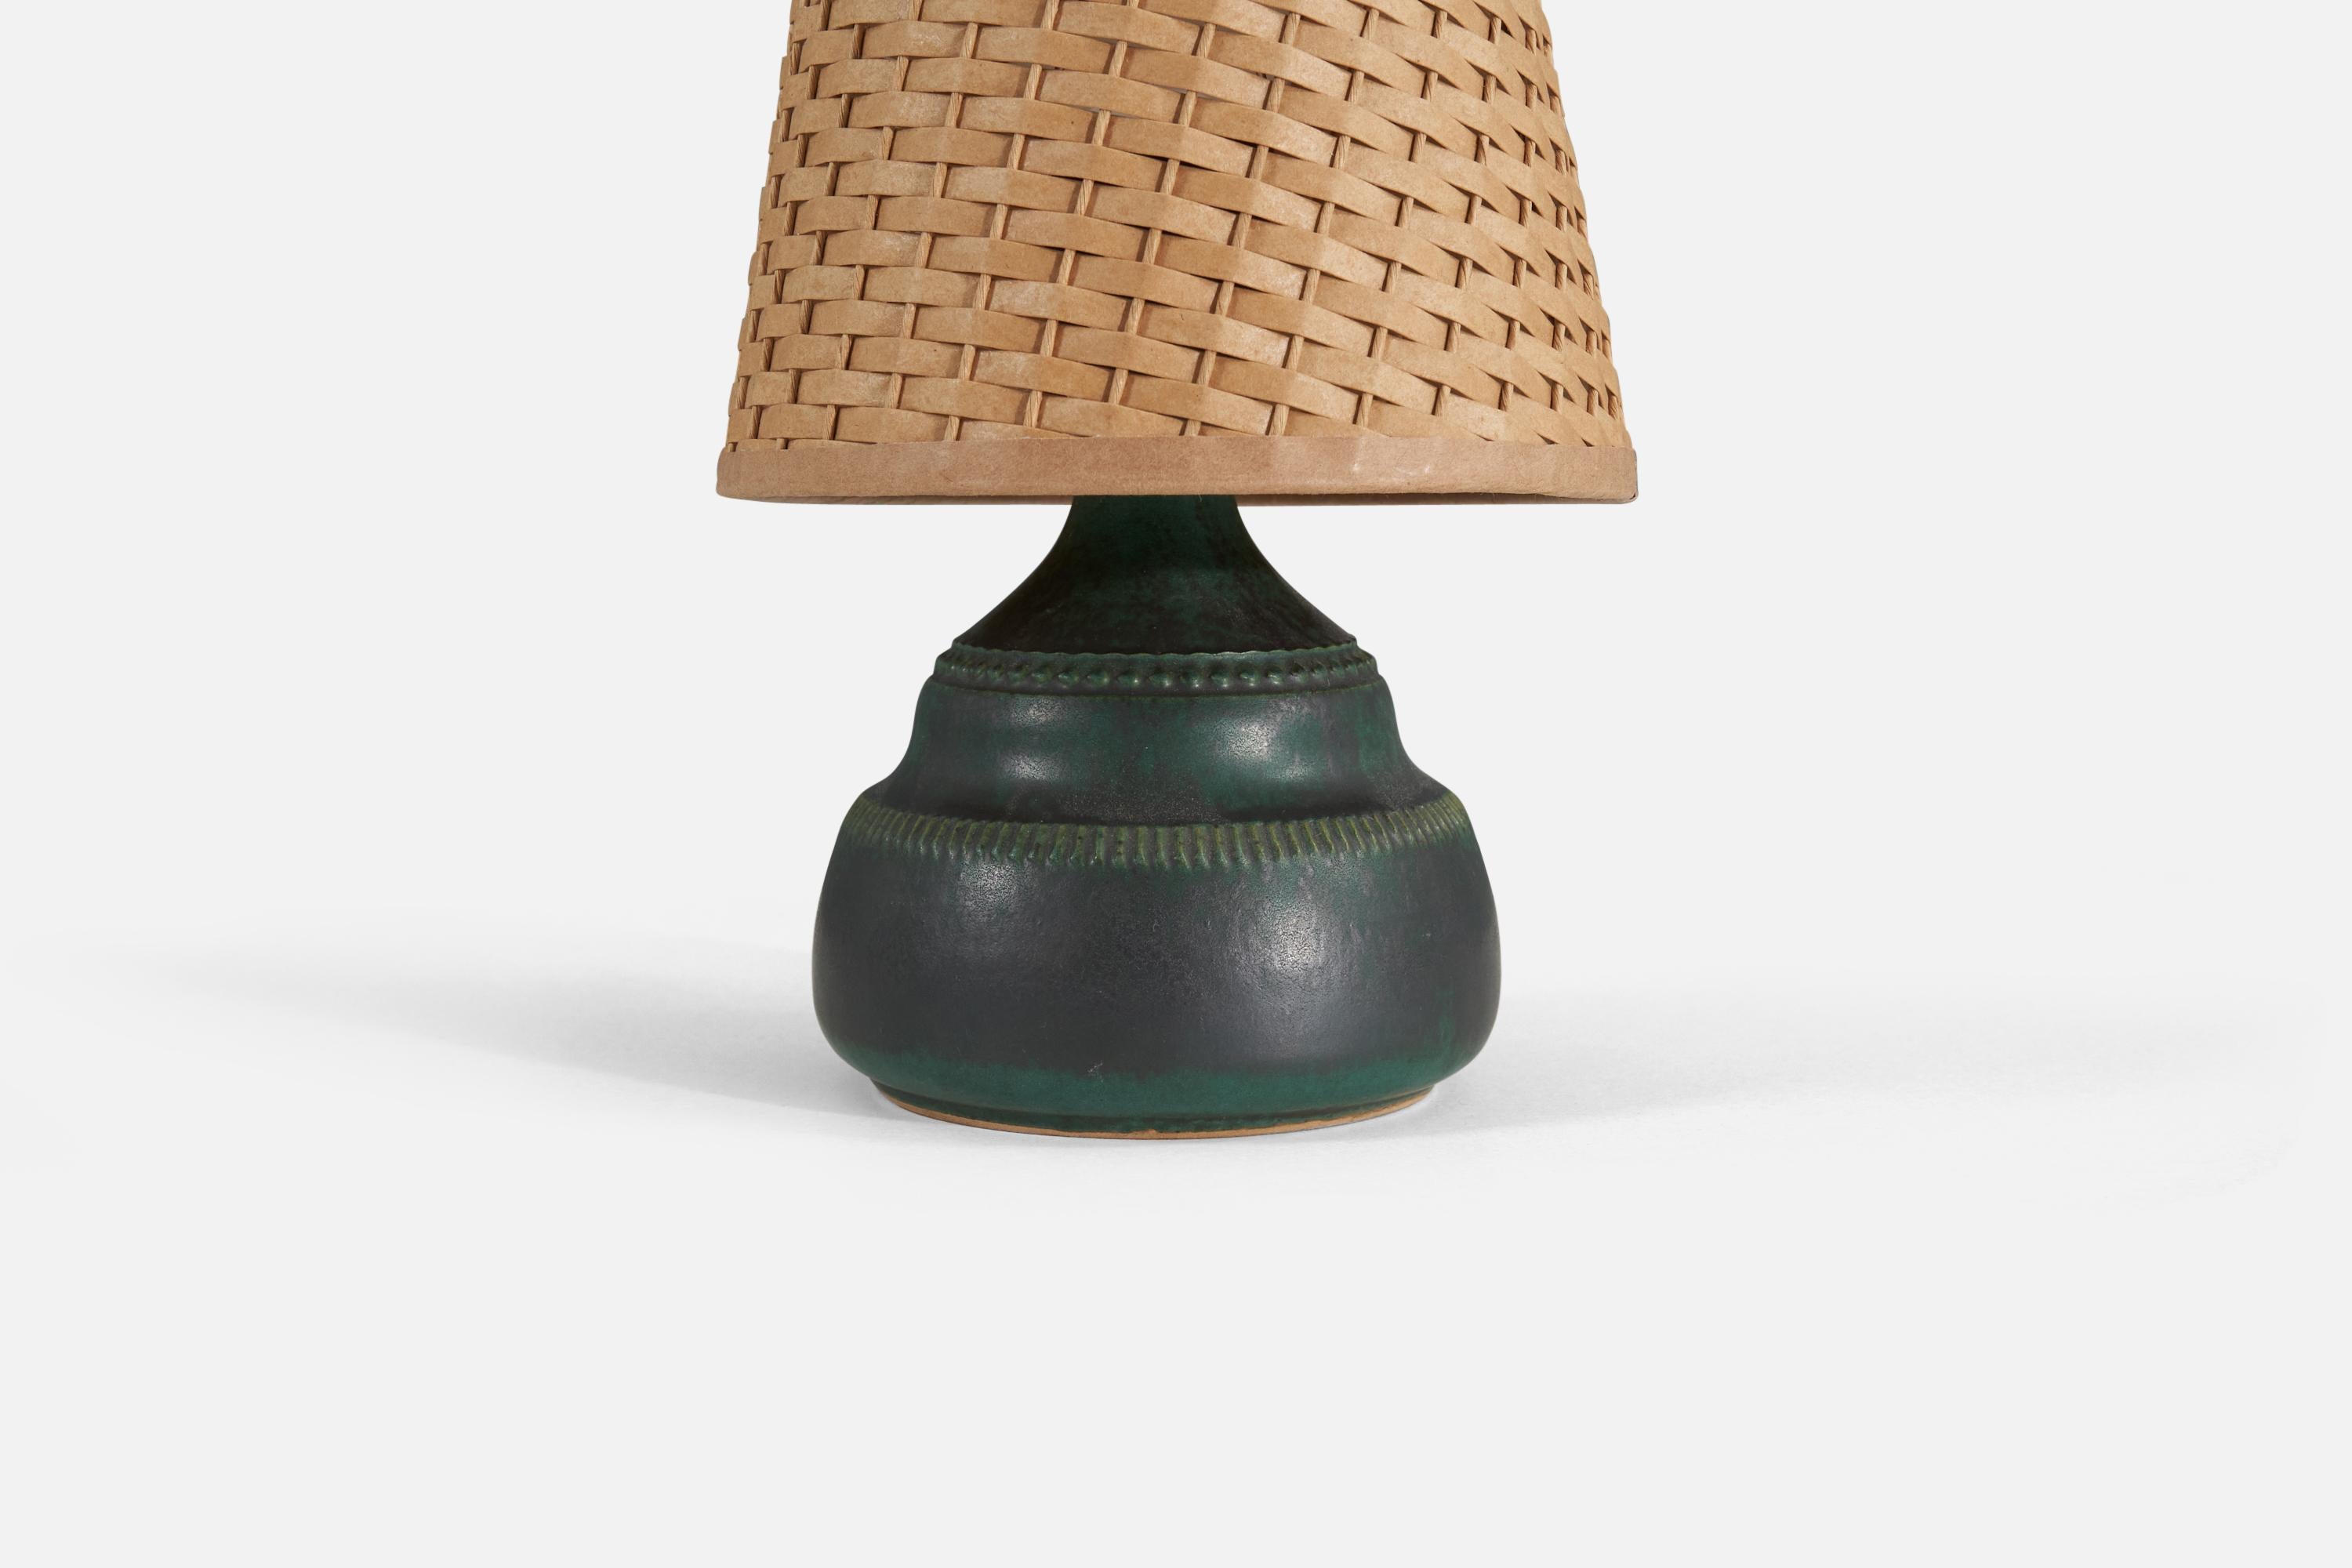 Klase Höganäs, Table Lamp, Green-Glazed Stoneware, Rattan, Sweden, 1960s In Good Condition For Sale In High Point, NC